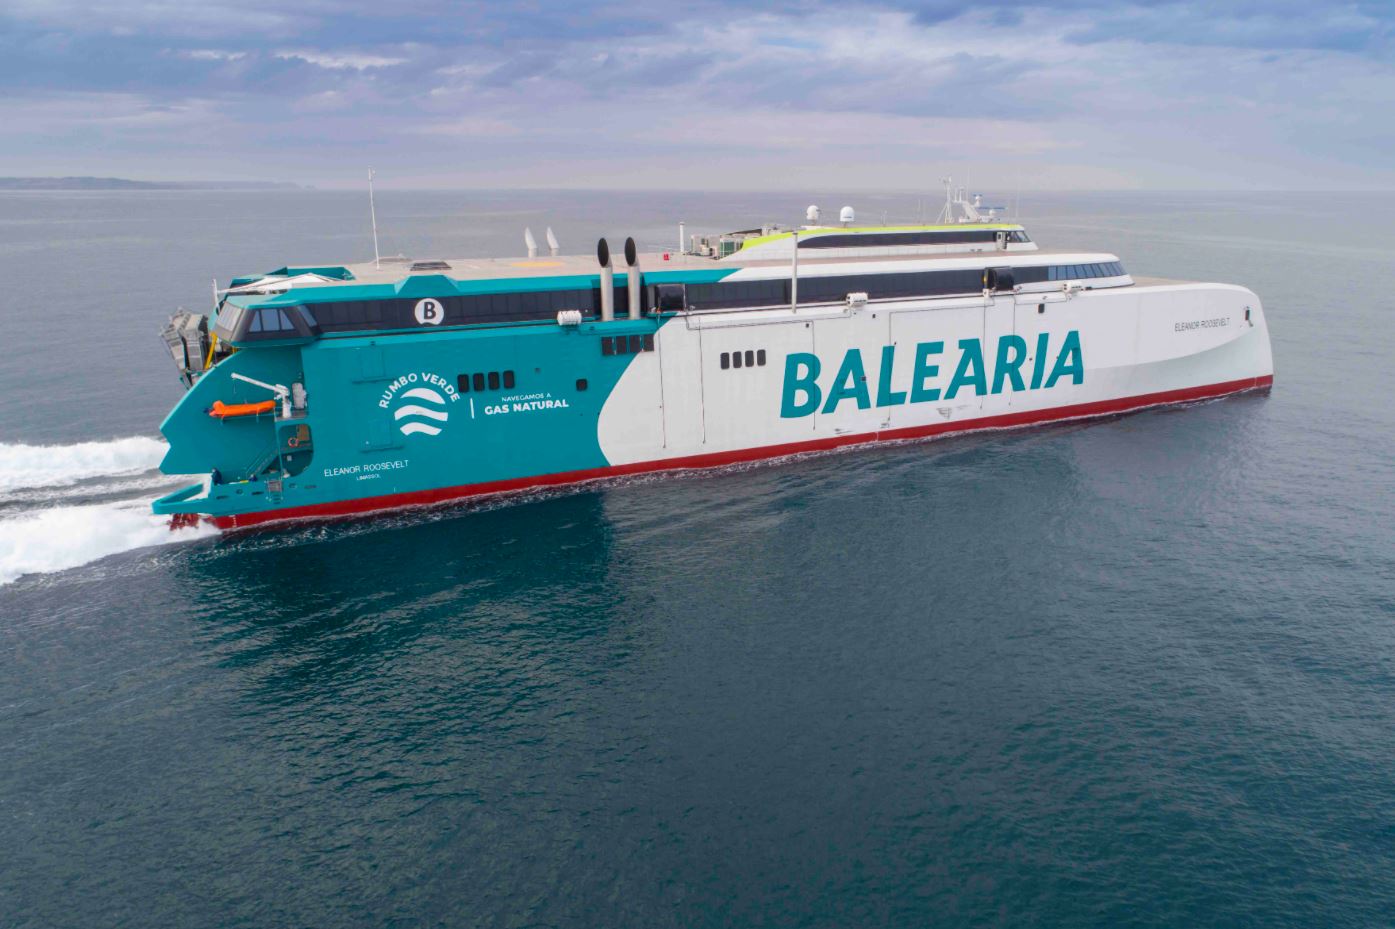 Balearia's LNG-powered fast ferry undergoing trials as delivery nears